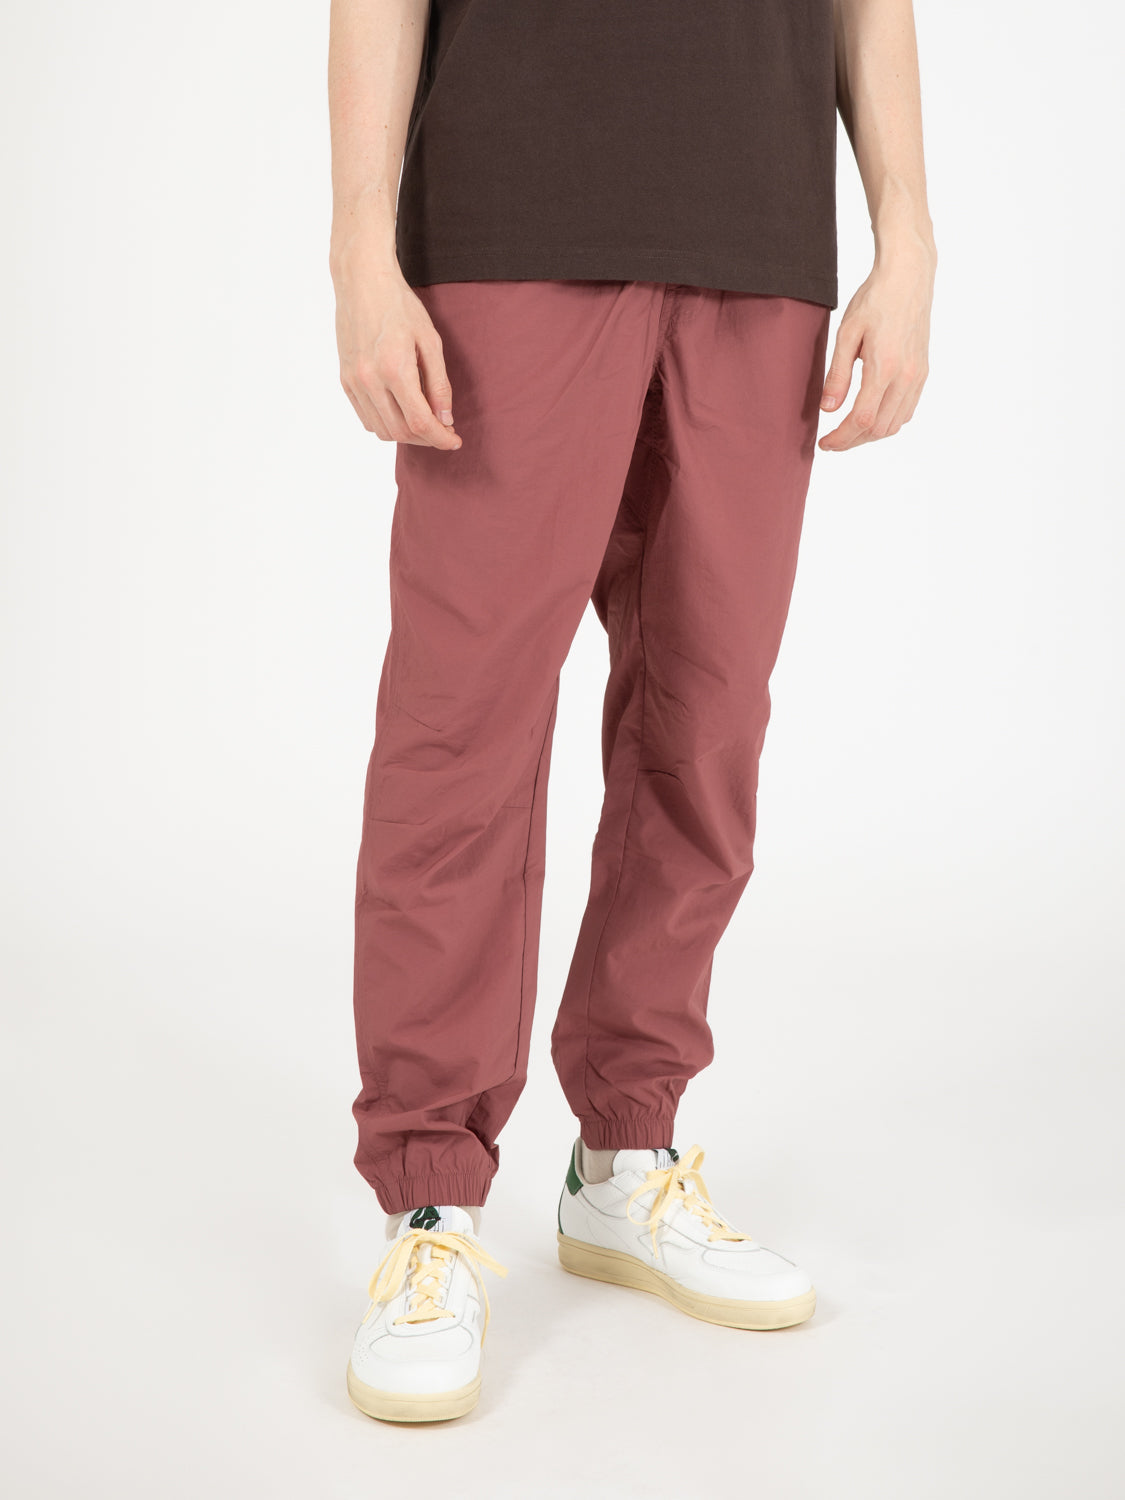 Men's Tenacity Lined Woven Trousers Apparel - New Balance